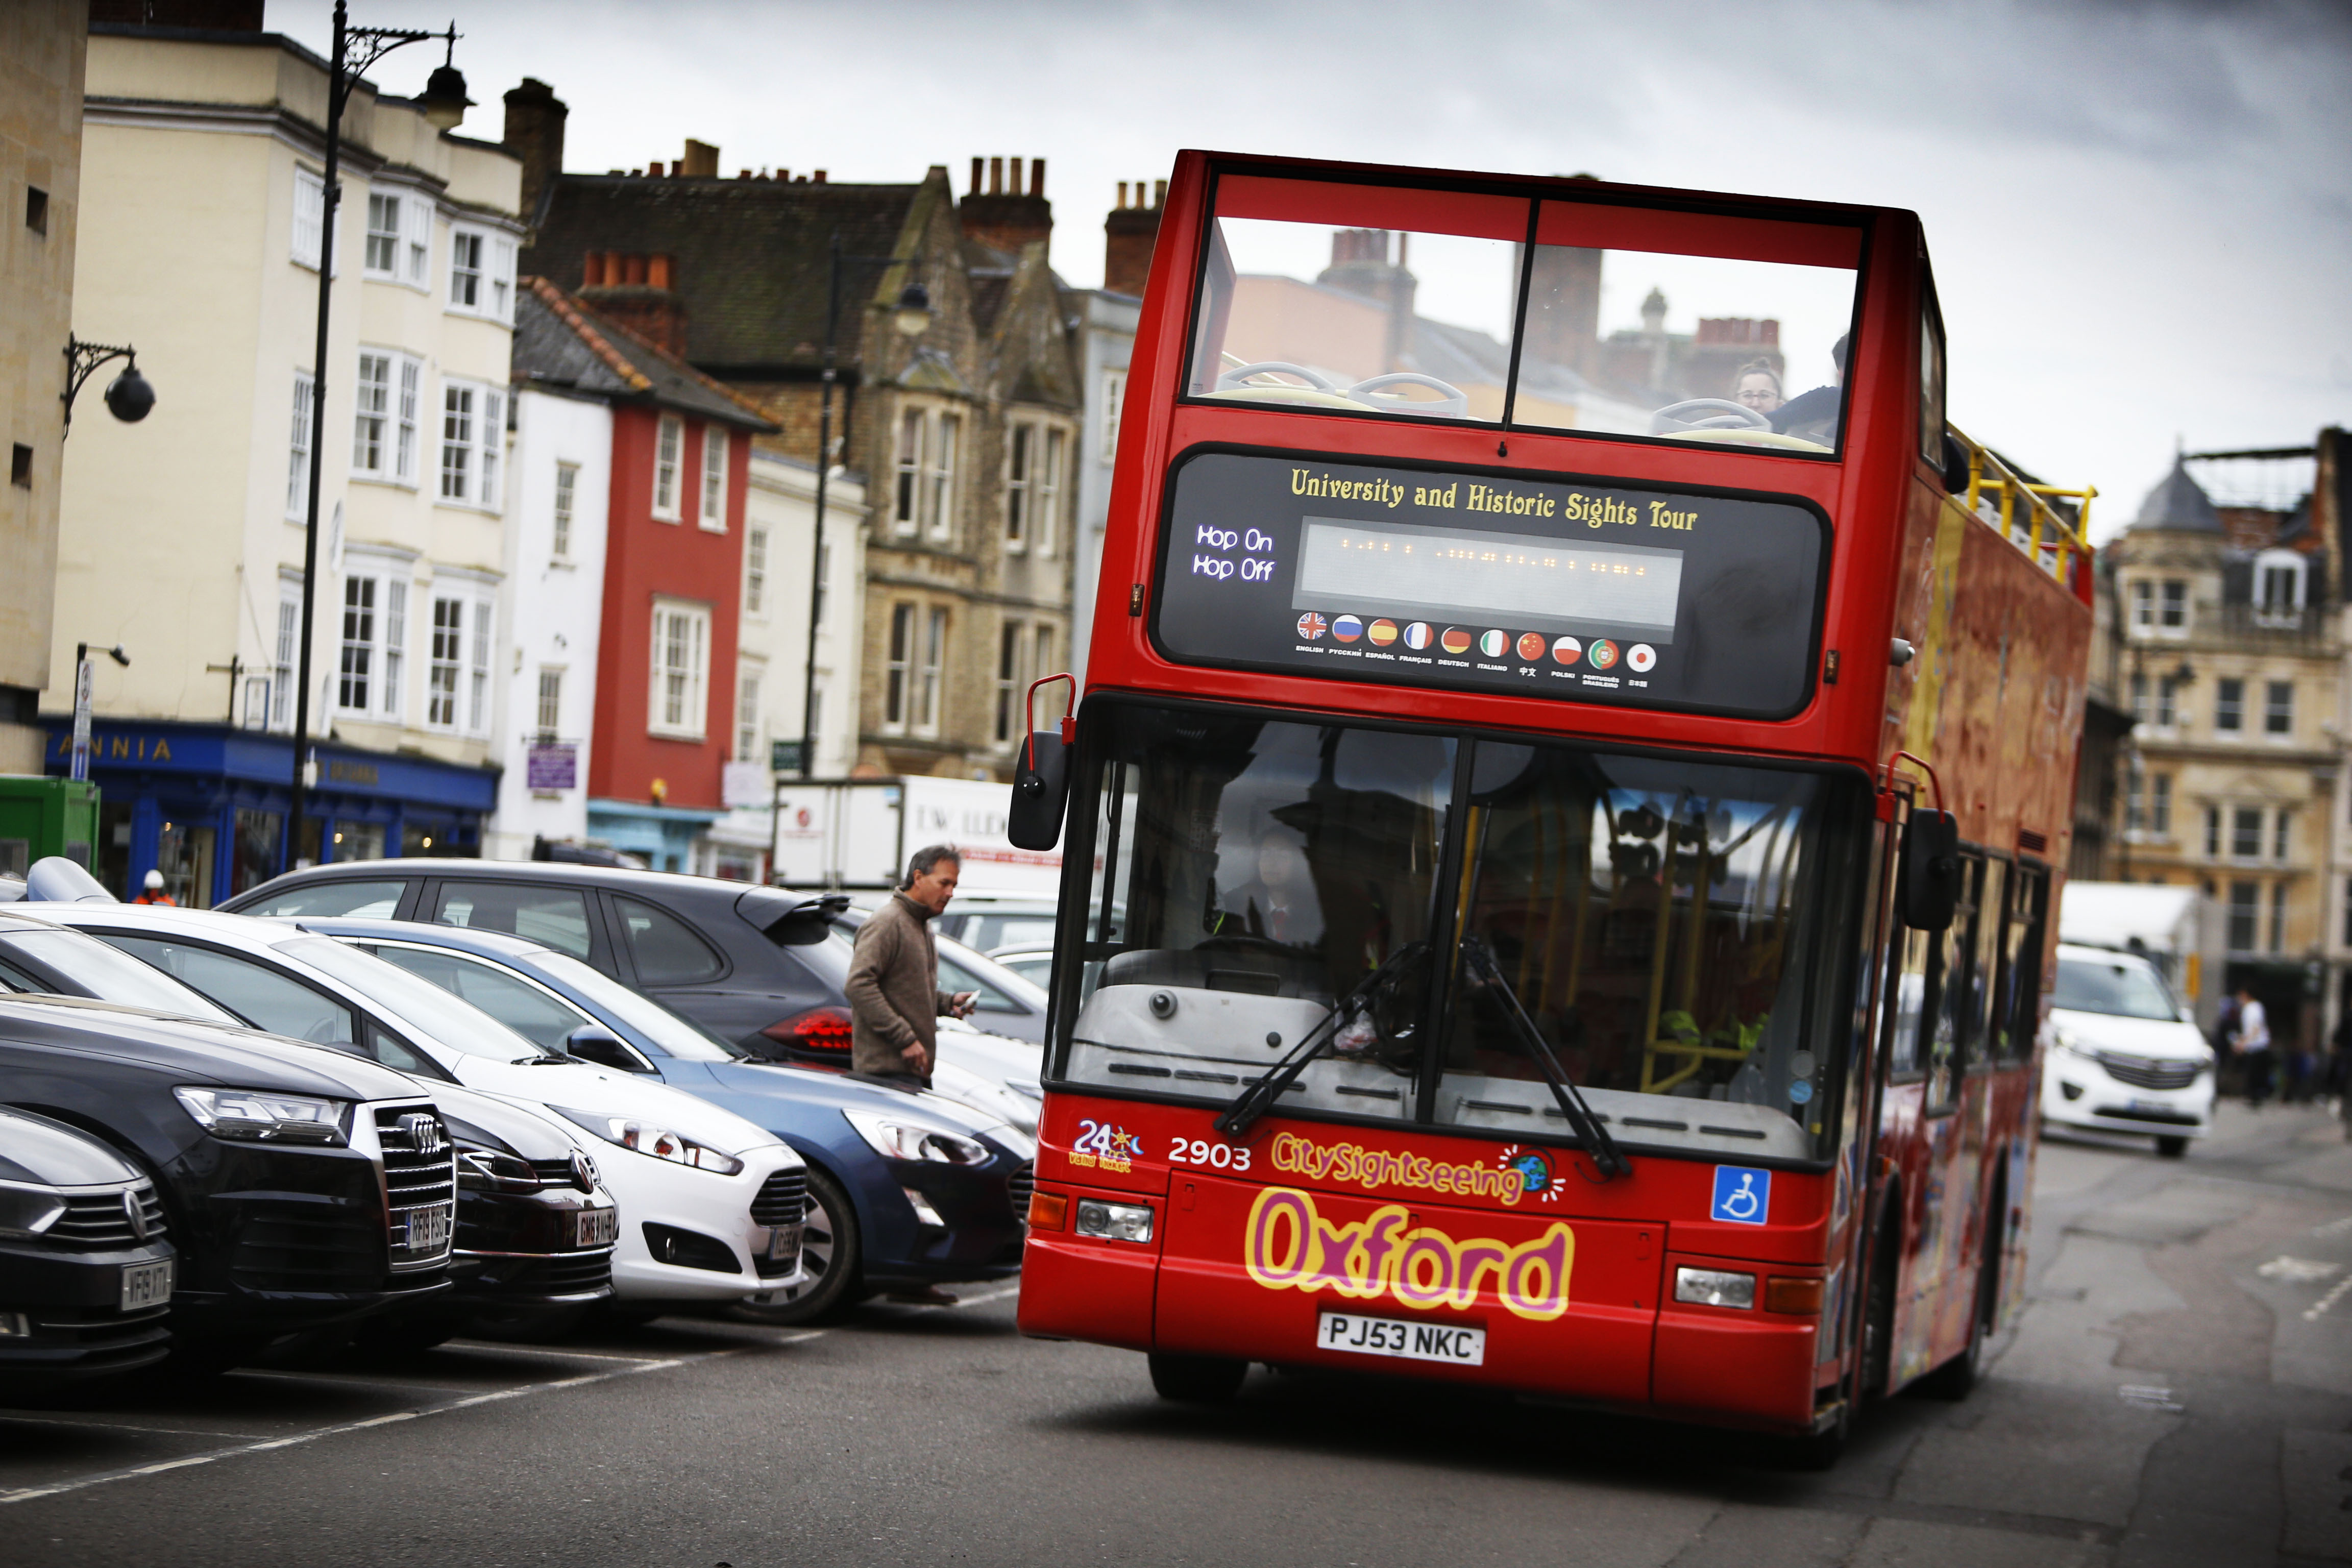 City Sightseeing returning to Oxford